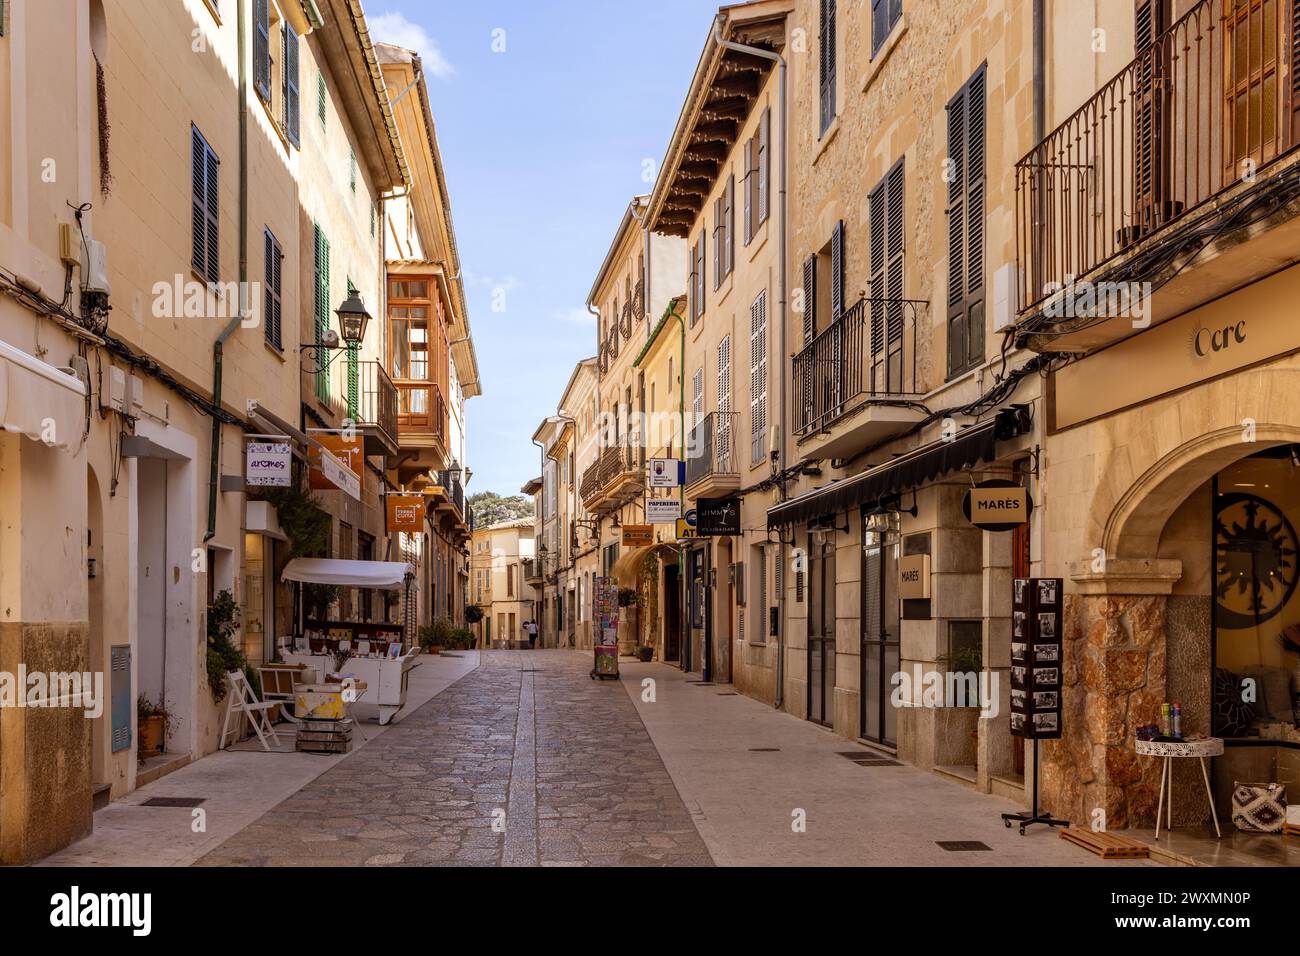 Carrer Major street in the attractive small towns of Polleca in Mallorca, Spain Stock Photo